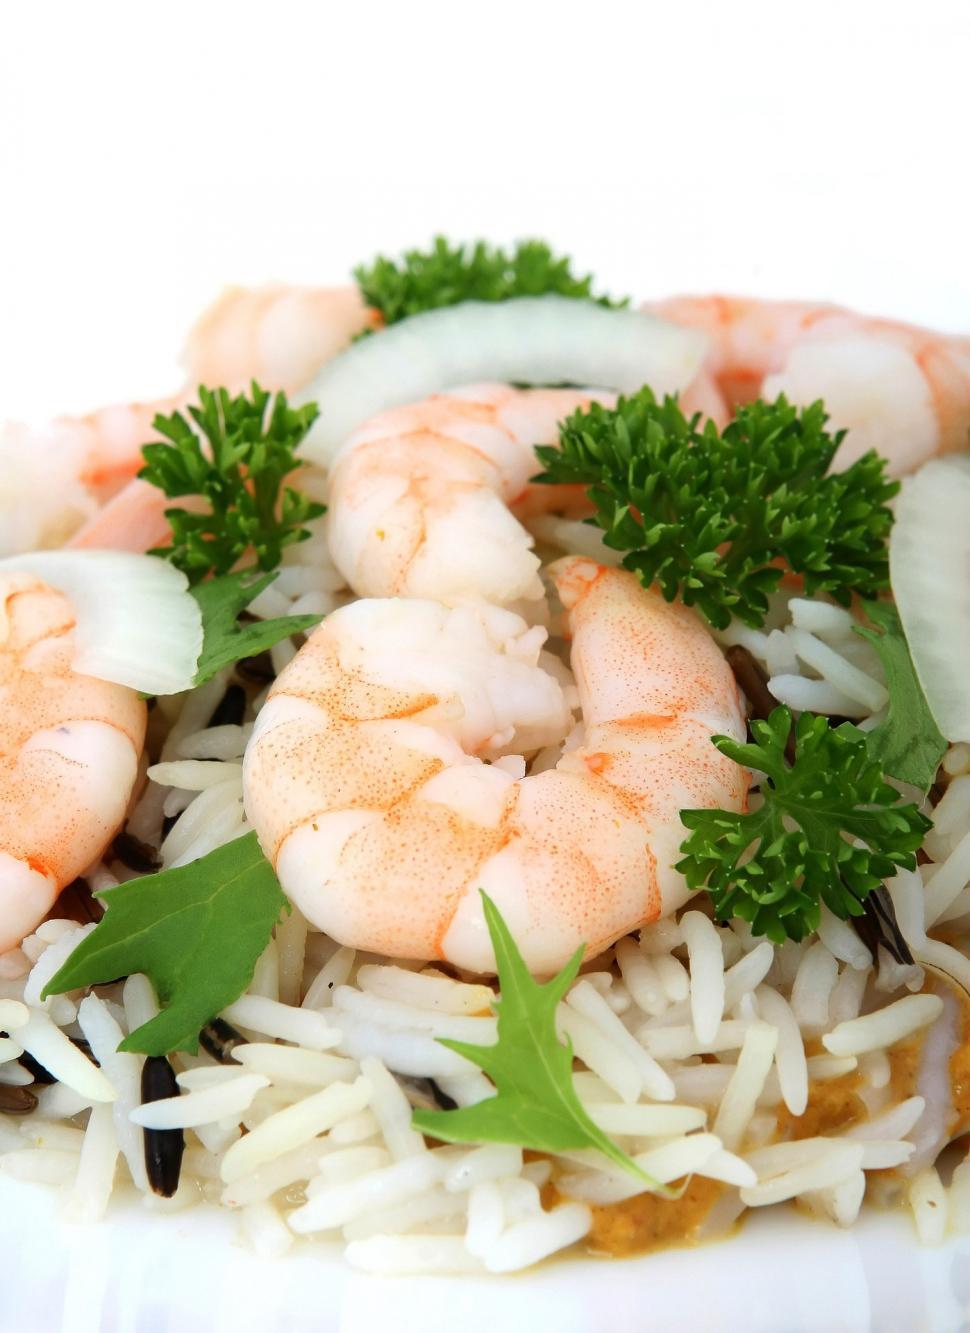 Free Image of Close Up of a Plate of Food With Shrimp and Rice 